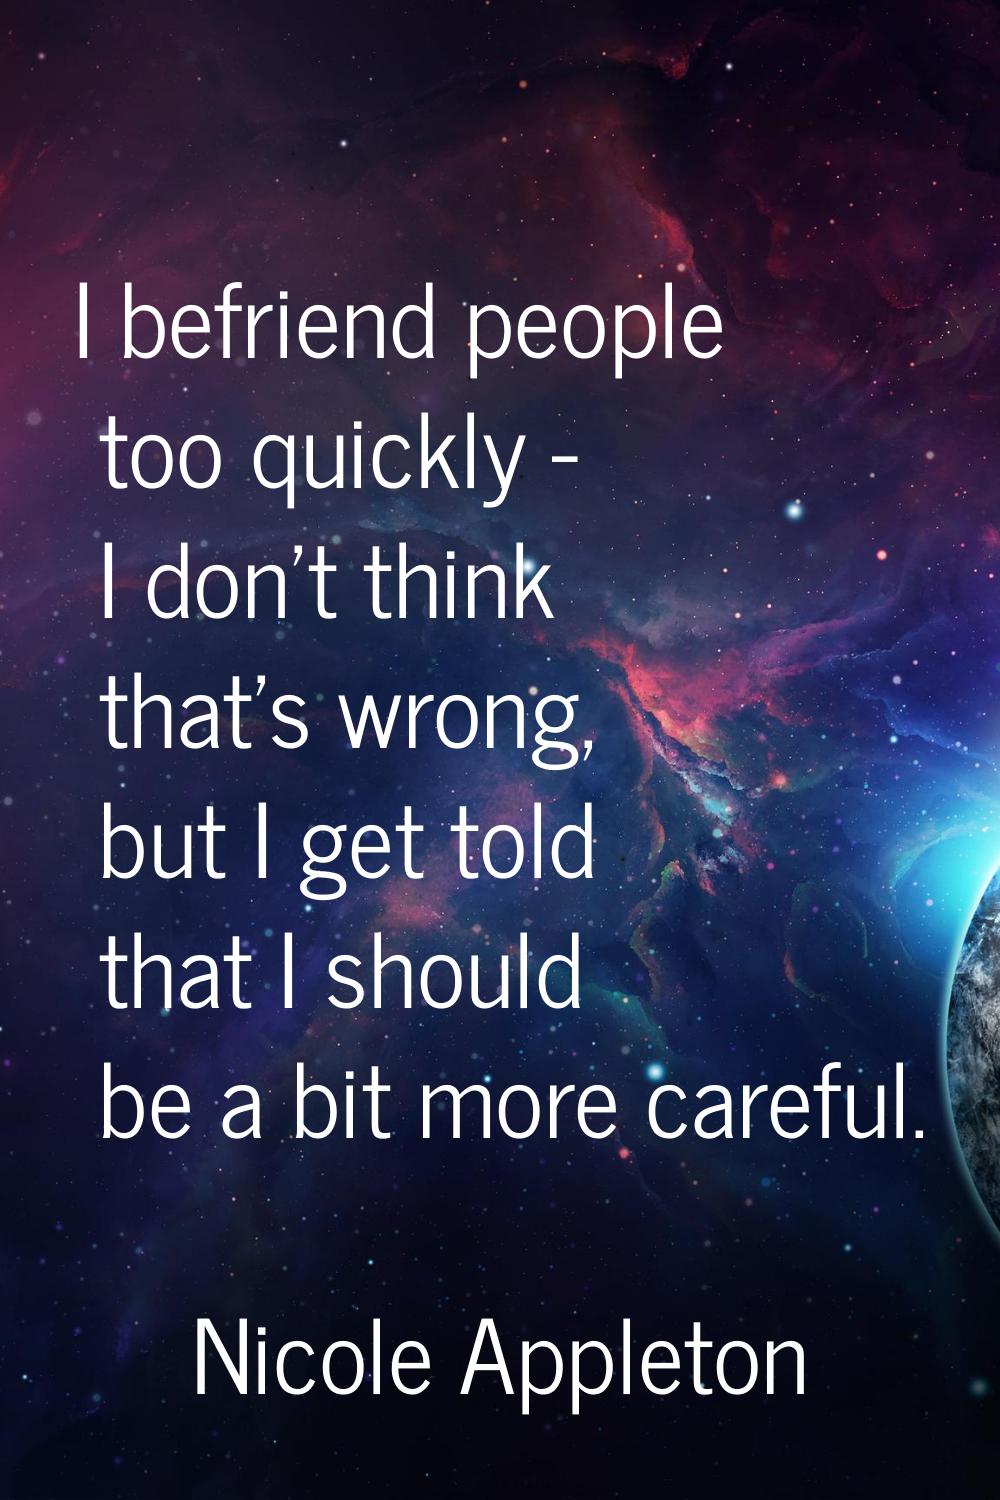 I befriend people too quickly - I don't think that's wrong, but I get told that I should be a bit m